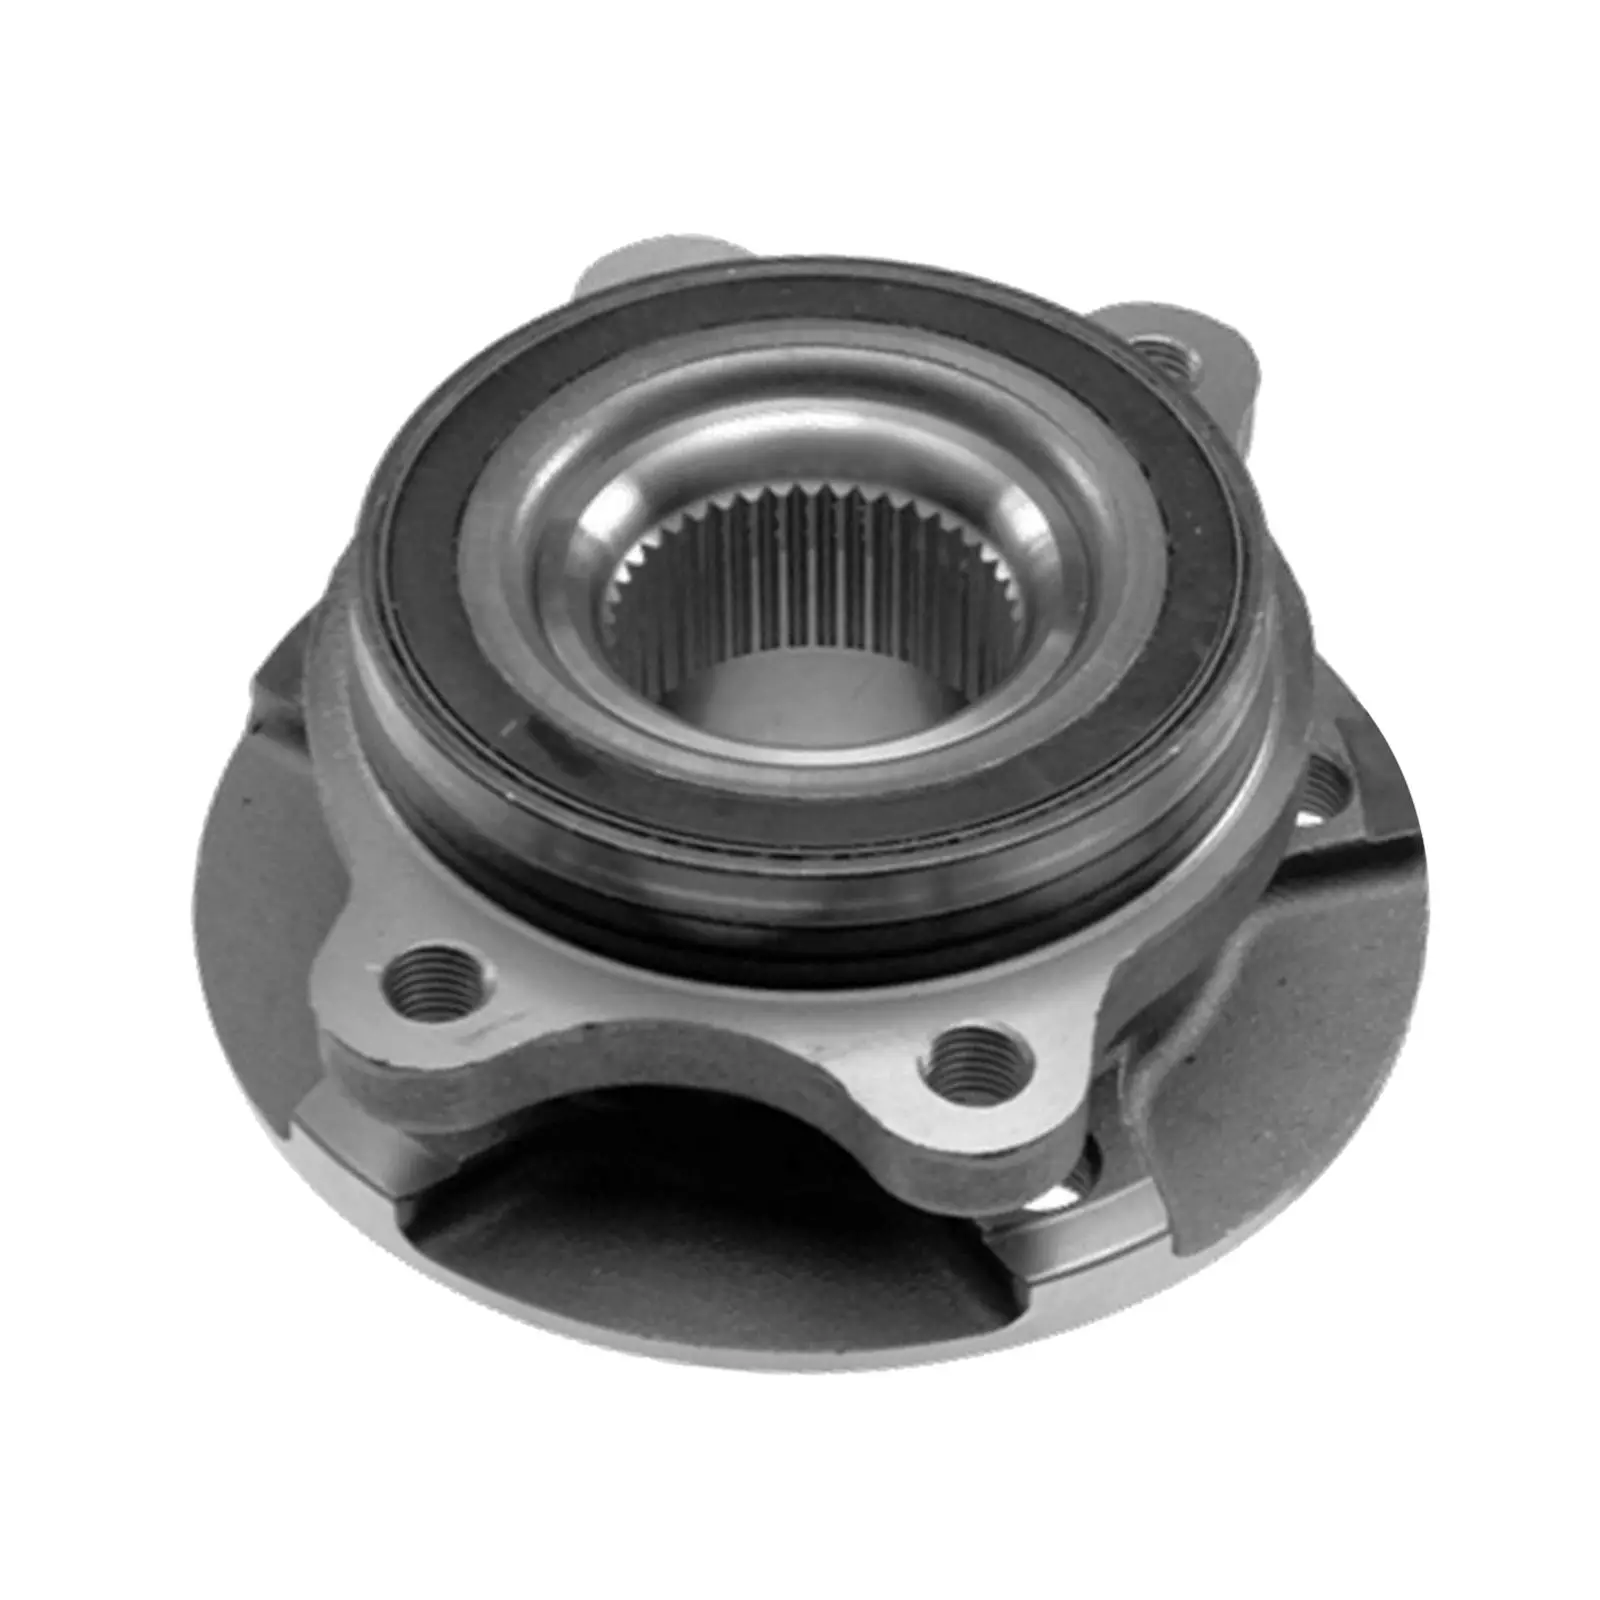 Left or Right Front Wheel Bearing Hub Assembly, Fit for Audi A4, 2009-2015 A5 2010-2014 2012-2015 Q5 2009-2015 S4 S5 2008-2015